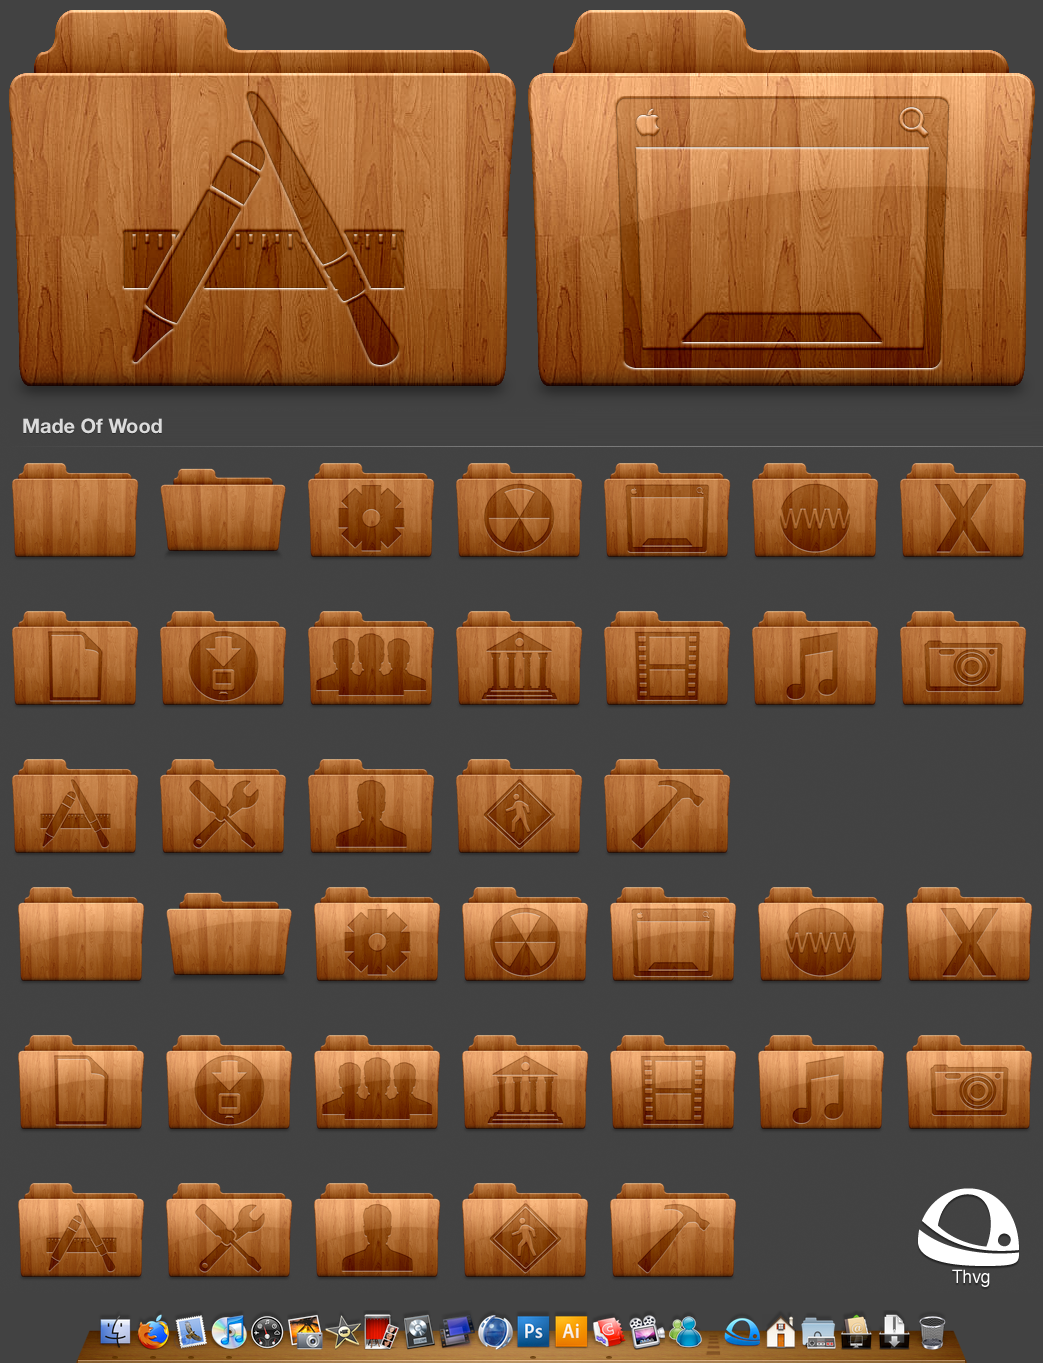 Games,Font,Adventure game,Puzzle,Screenshot,Wood,Toy,Wood stain,Fictional character,Metal